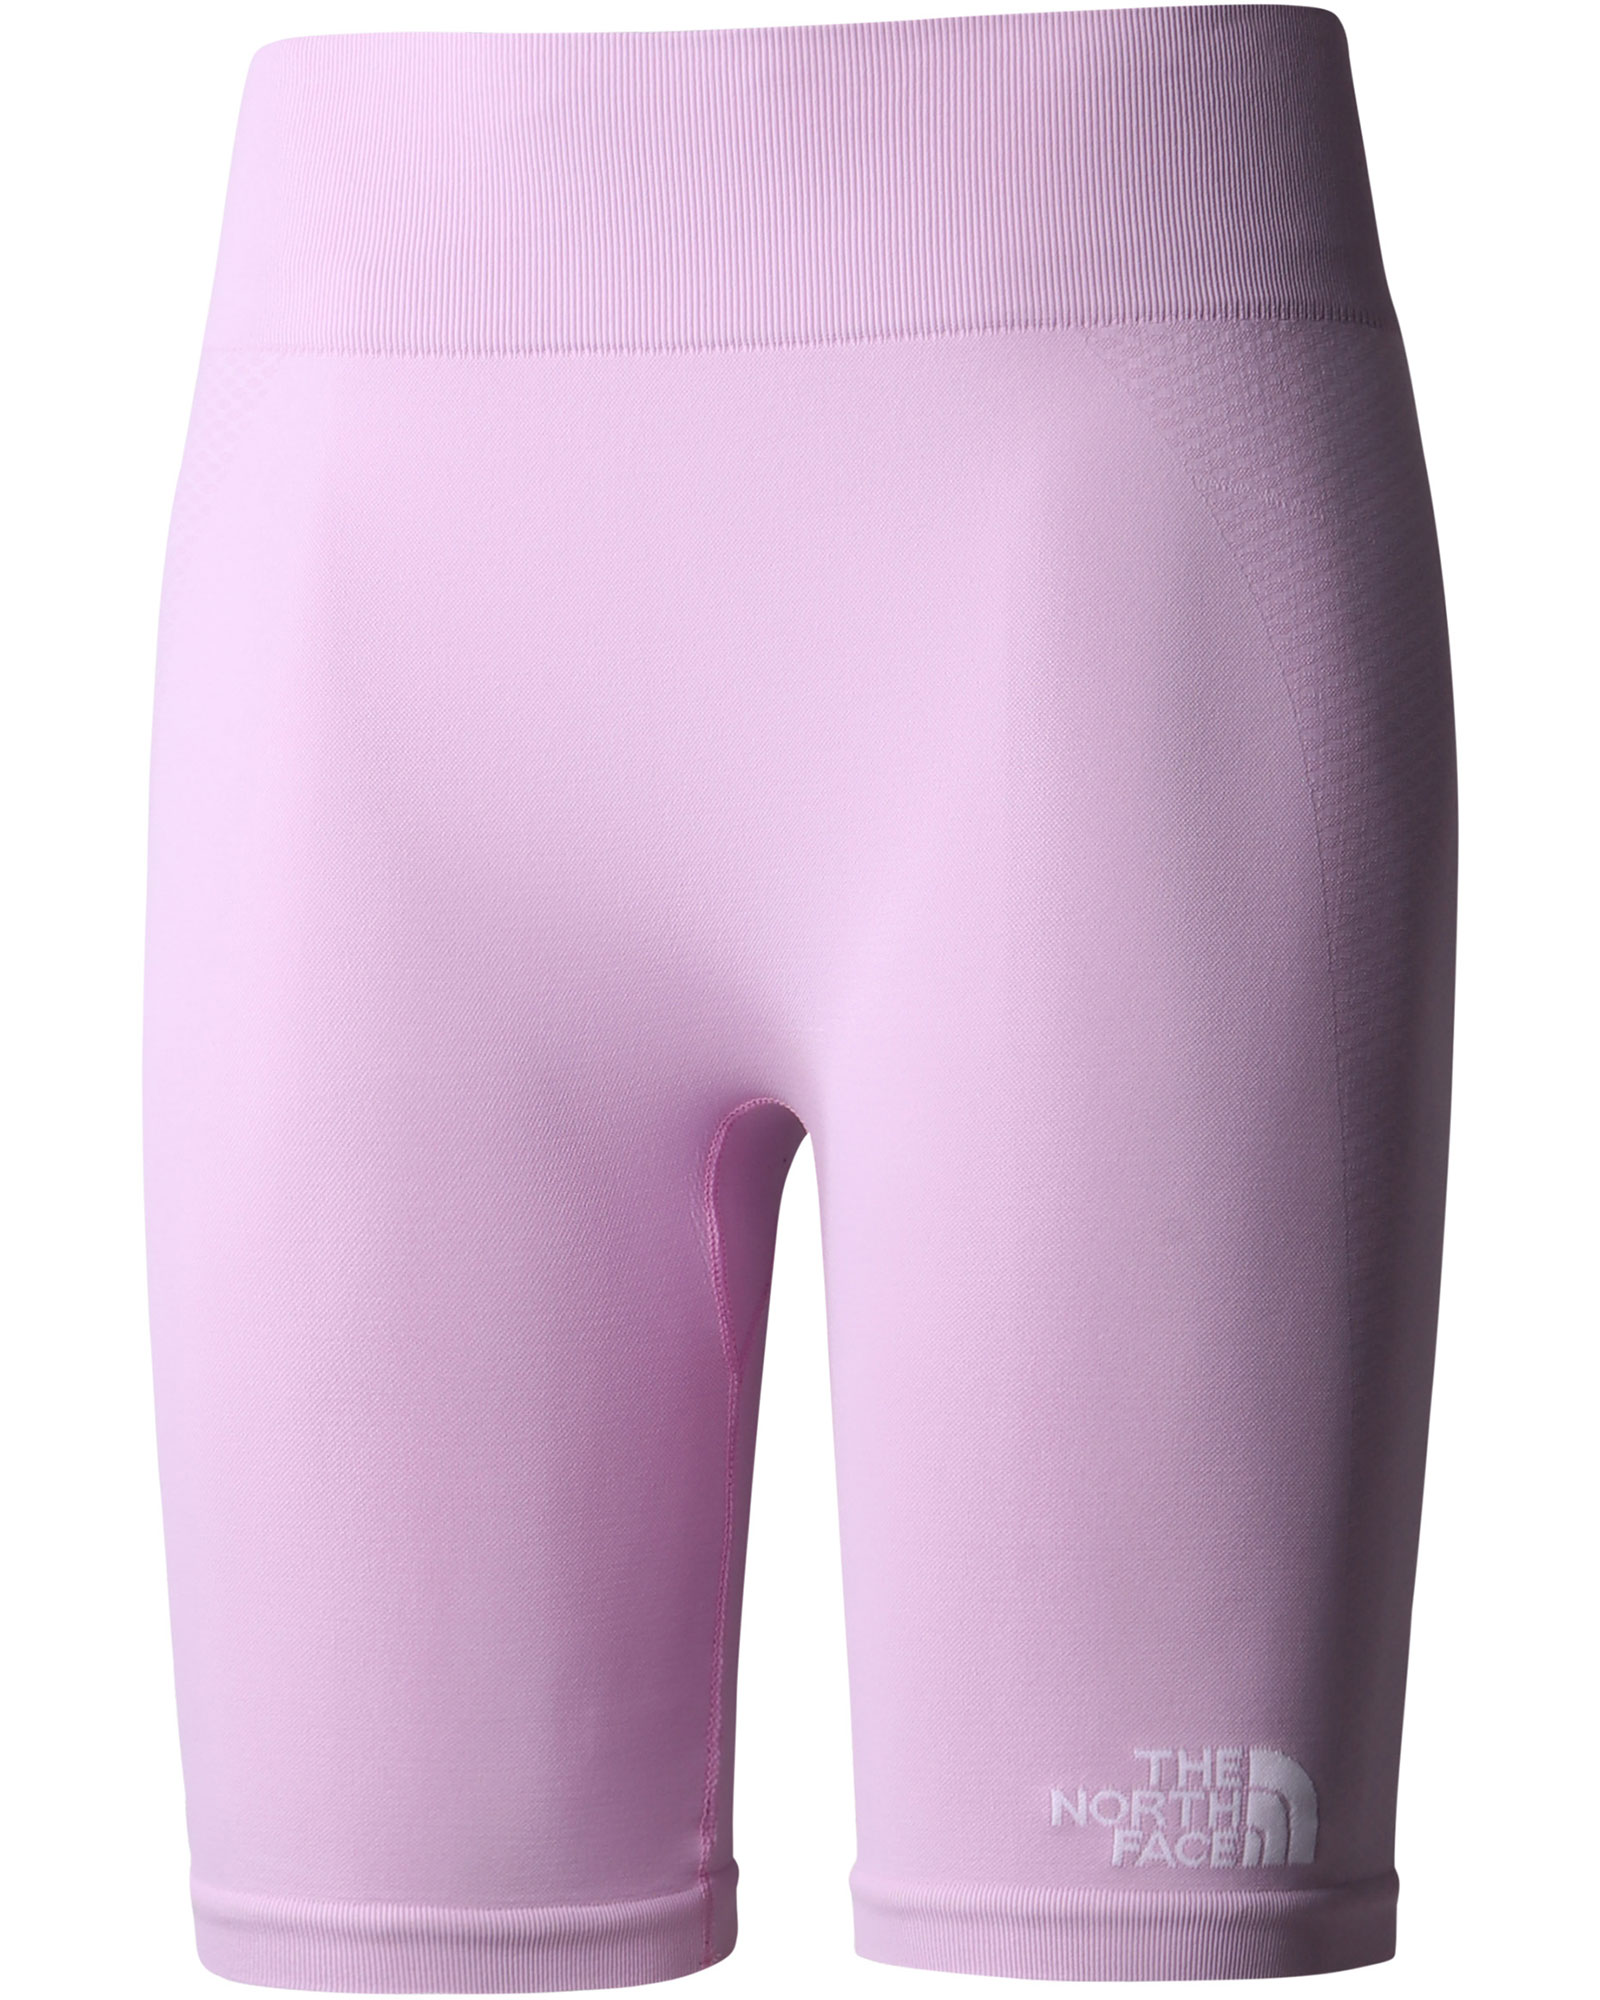 The North Face Women’s Seamless Shorts - Lupine XS/S